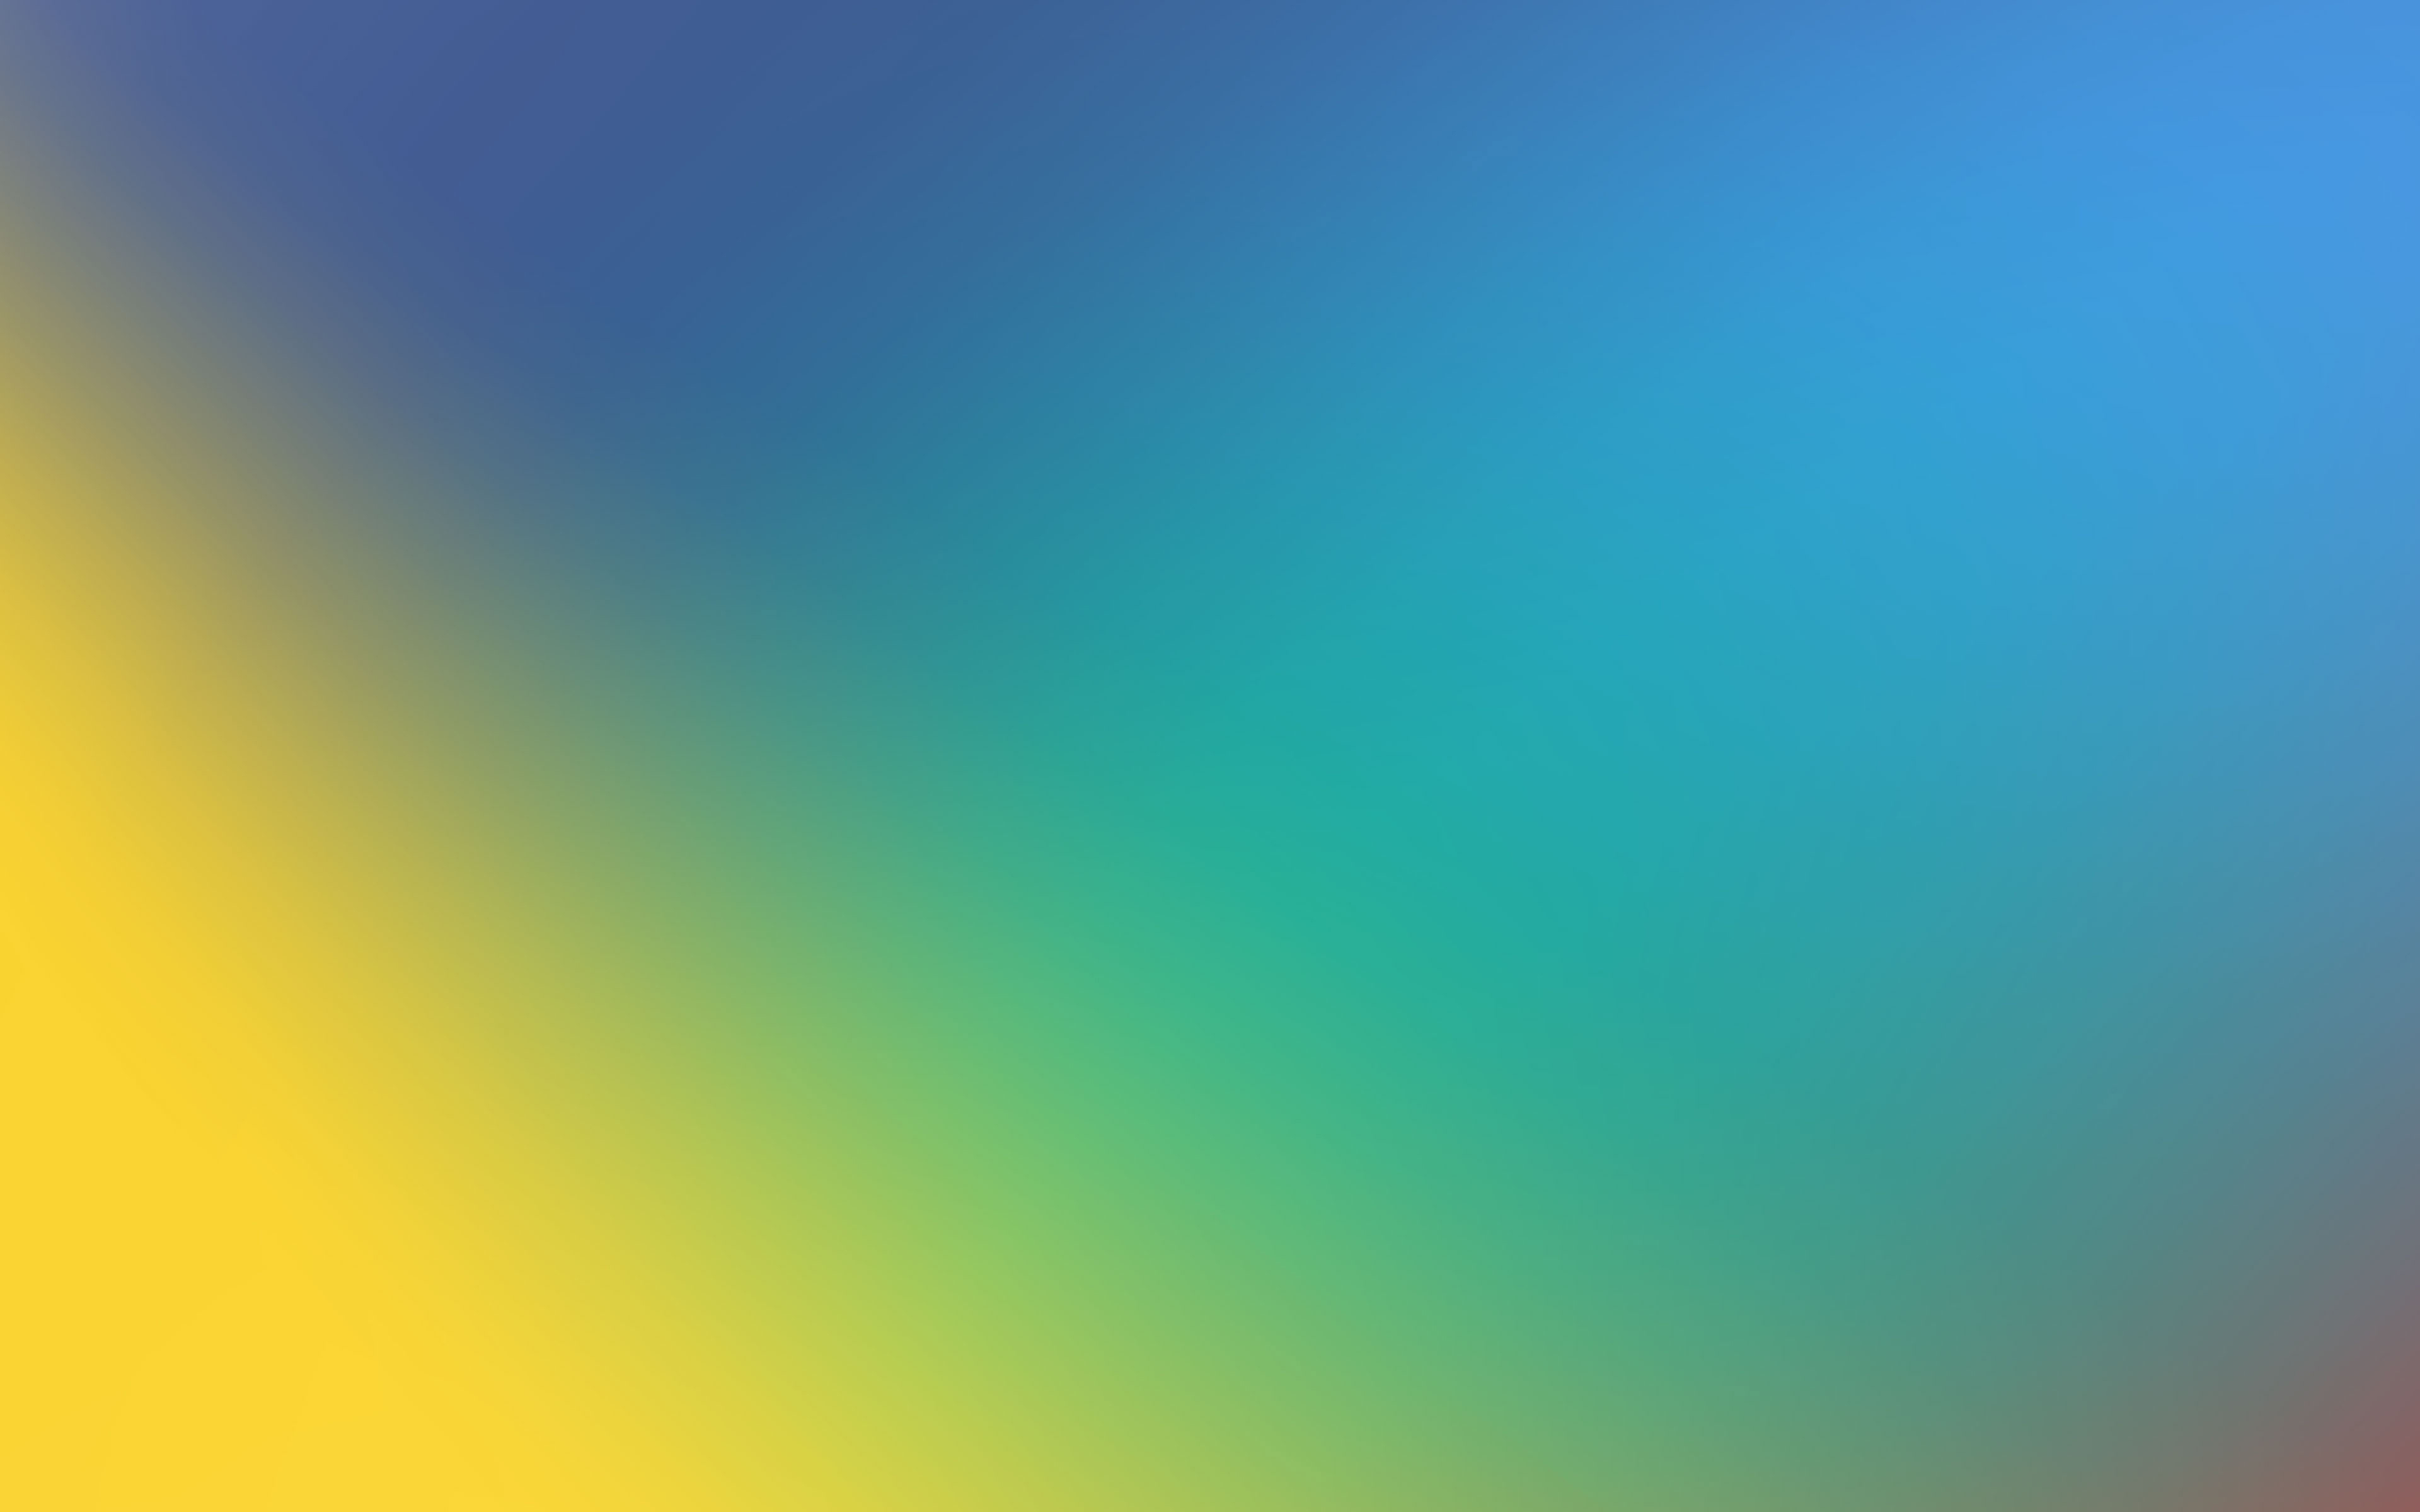 1200x1920 Colorful Gradient 1200x1920 Resolution Wallpaper Hd Abstract